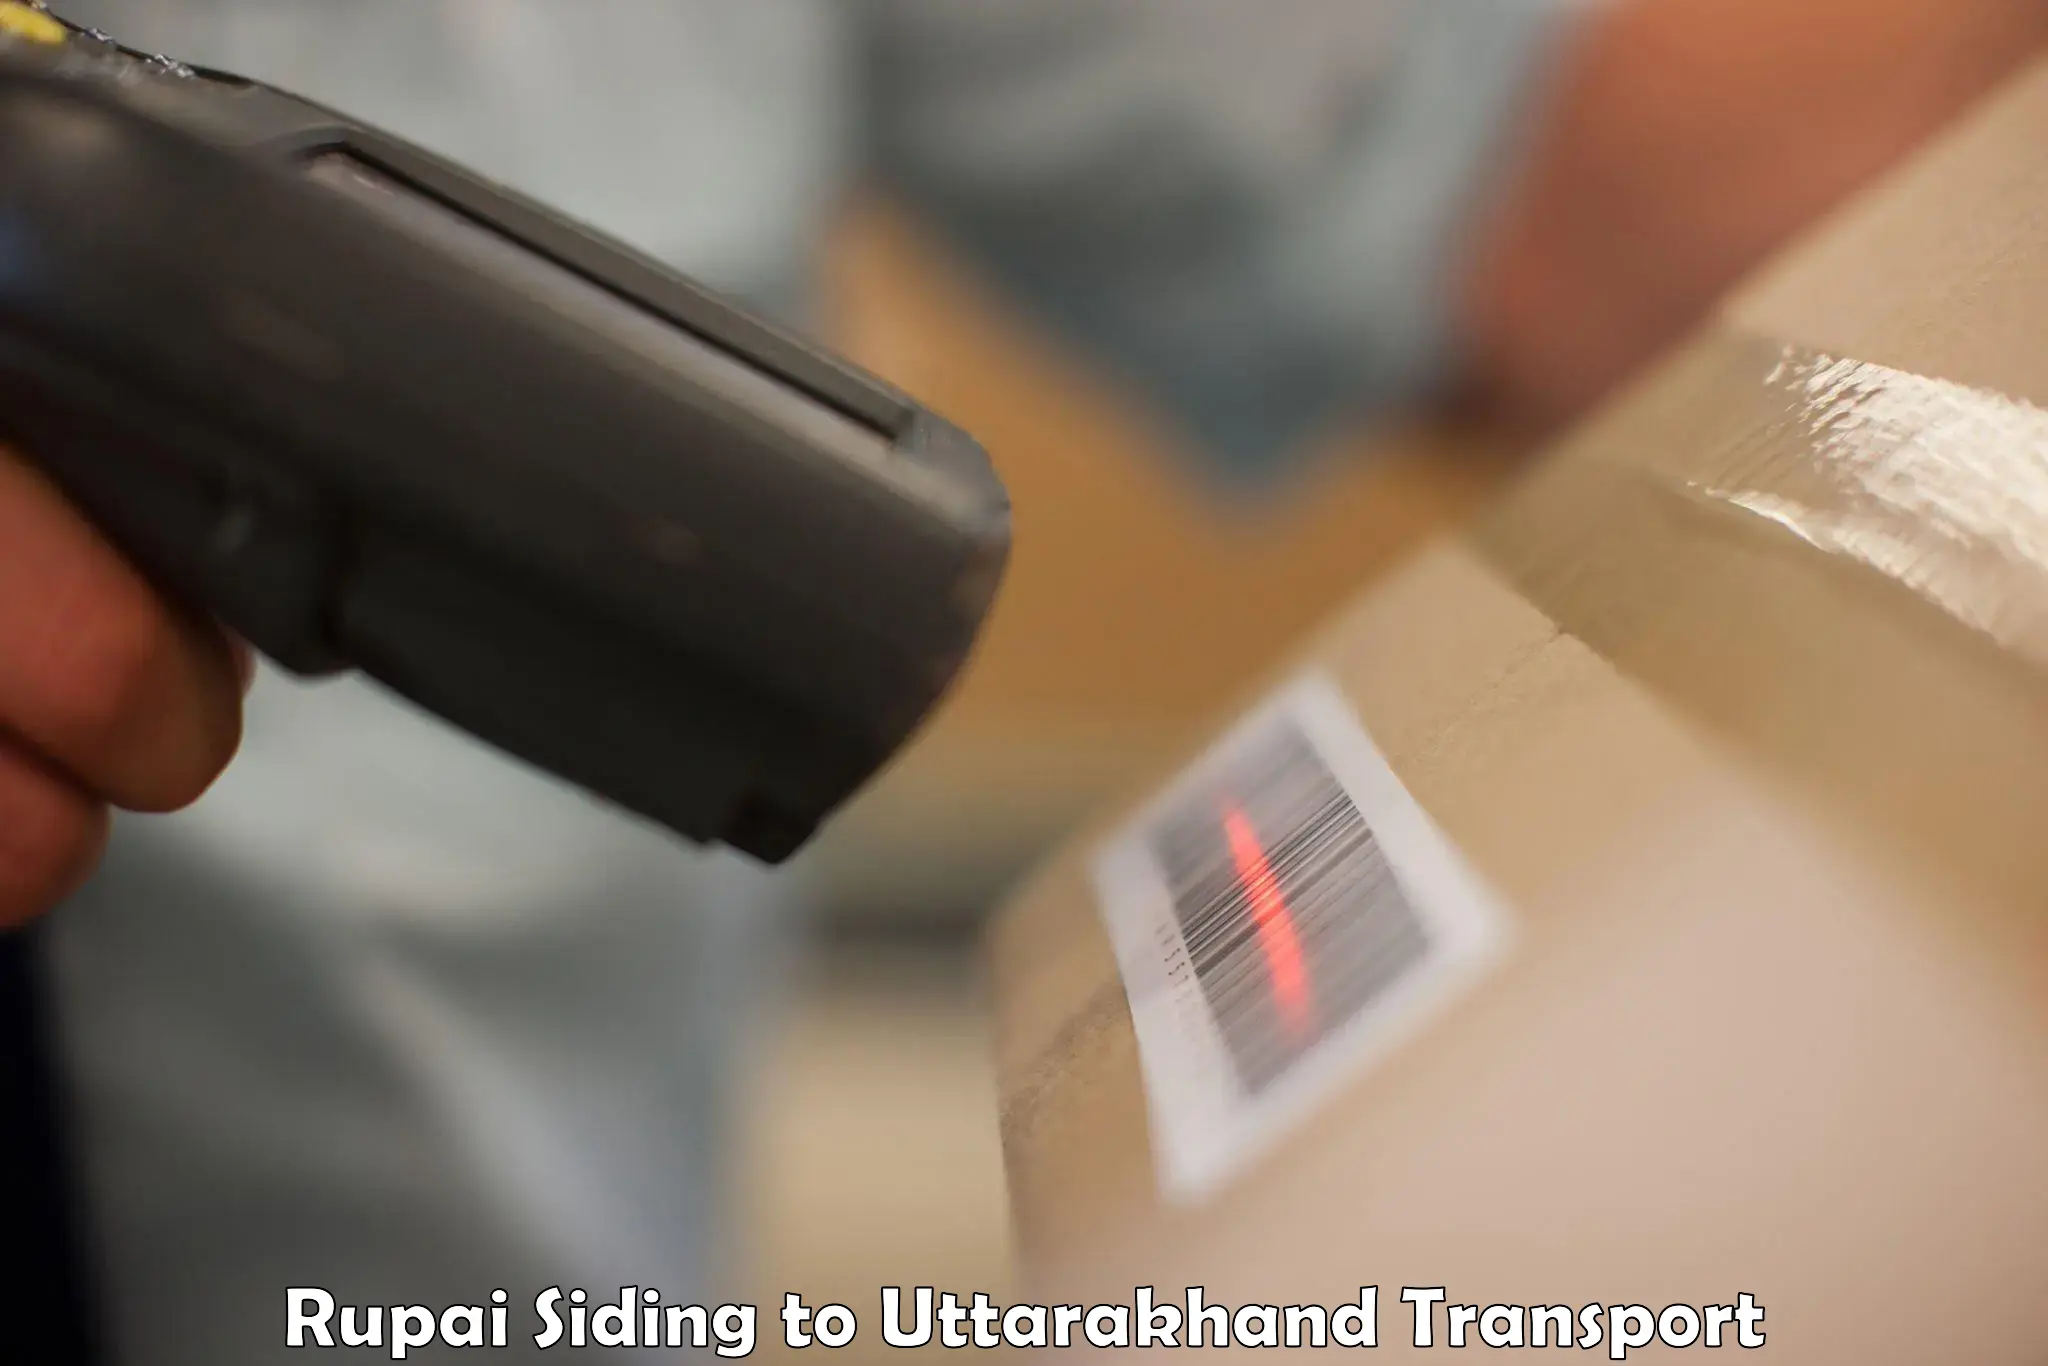 Nationwide transport services Rupai Siding to IIT Roorkee